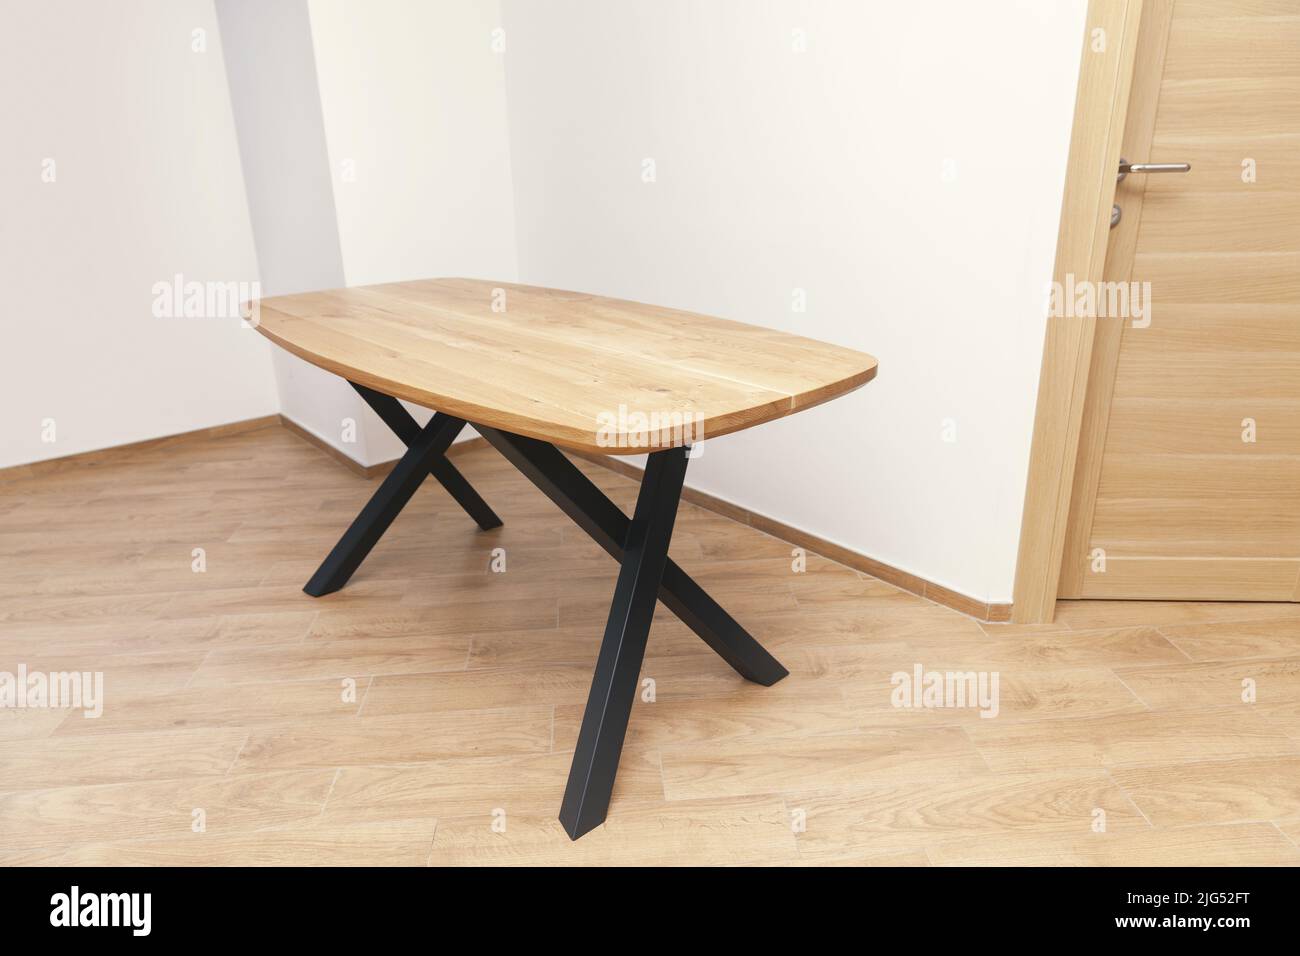 wooden table with black legs in empty room Stock Photo